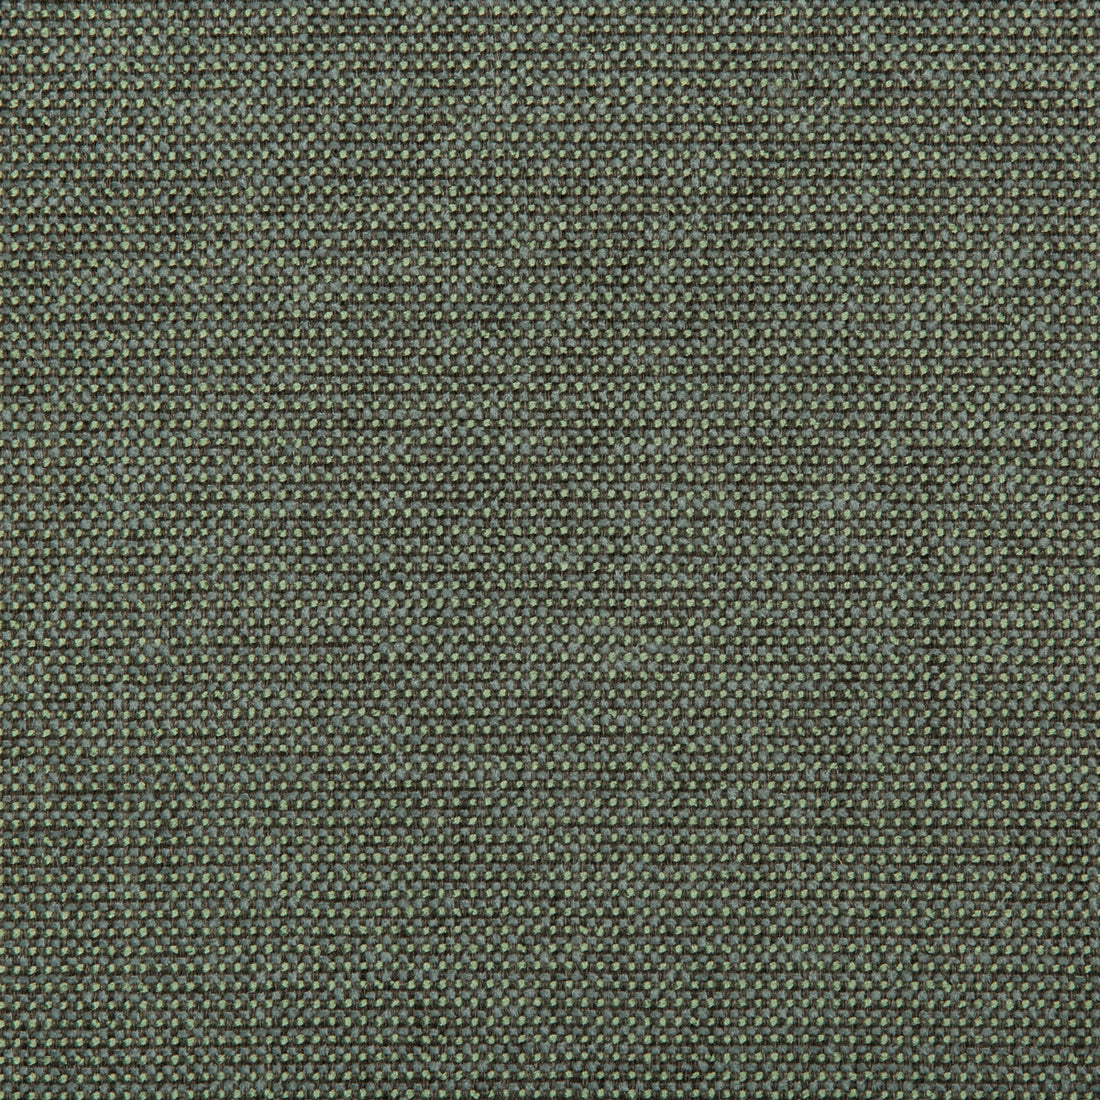 Burr fabric in juniper color - pattern 35745.321.0 - by Kravet Contract in the Value Kravetarmor collection